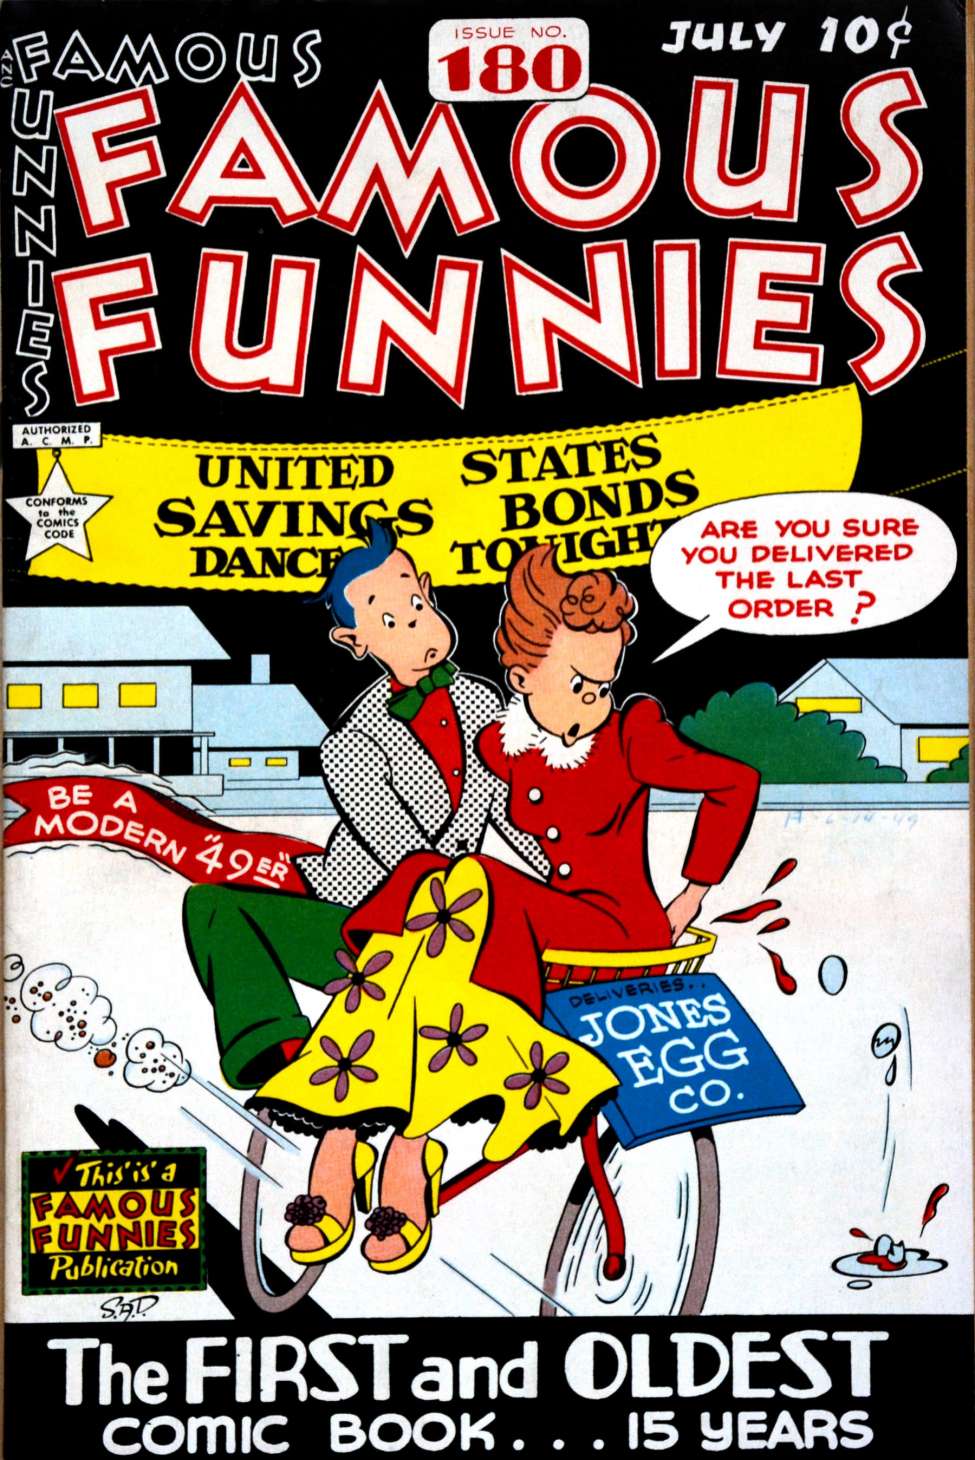 Book Cover For Famous Funnies 180